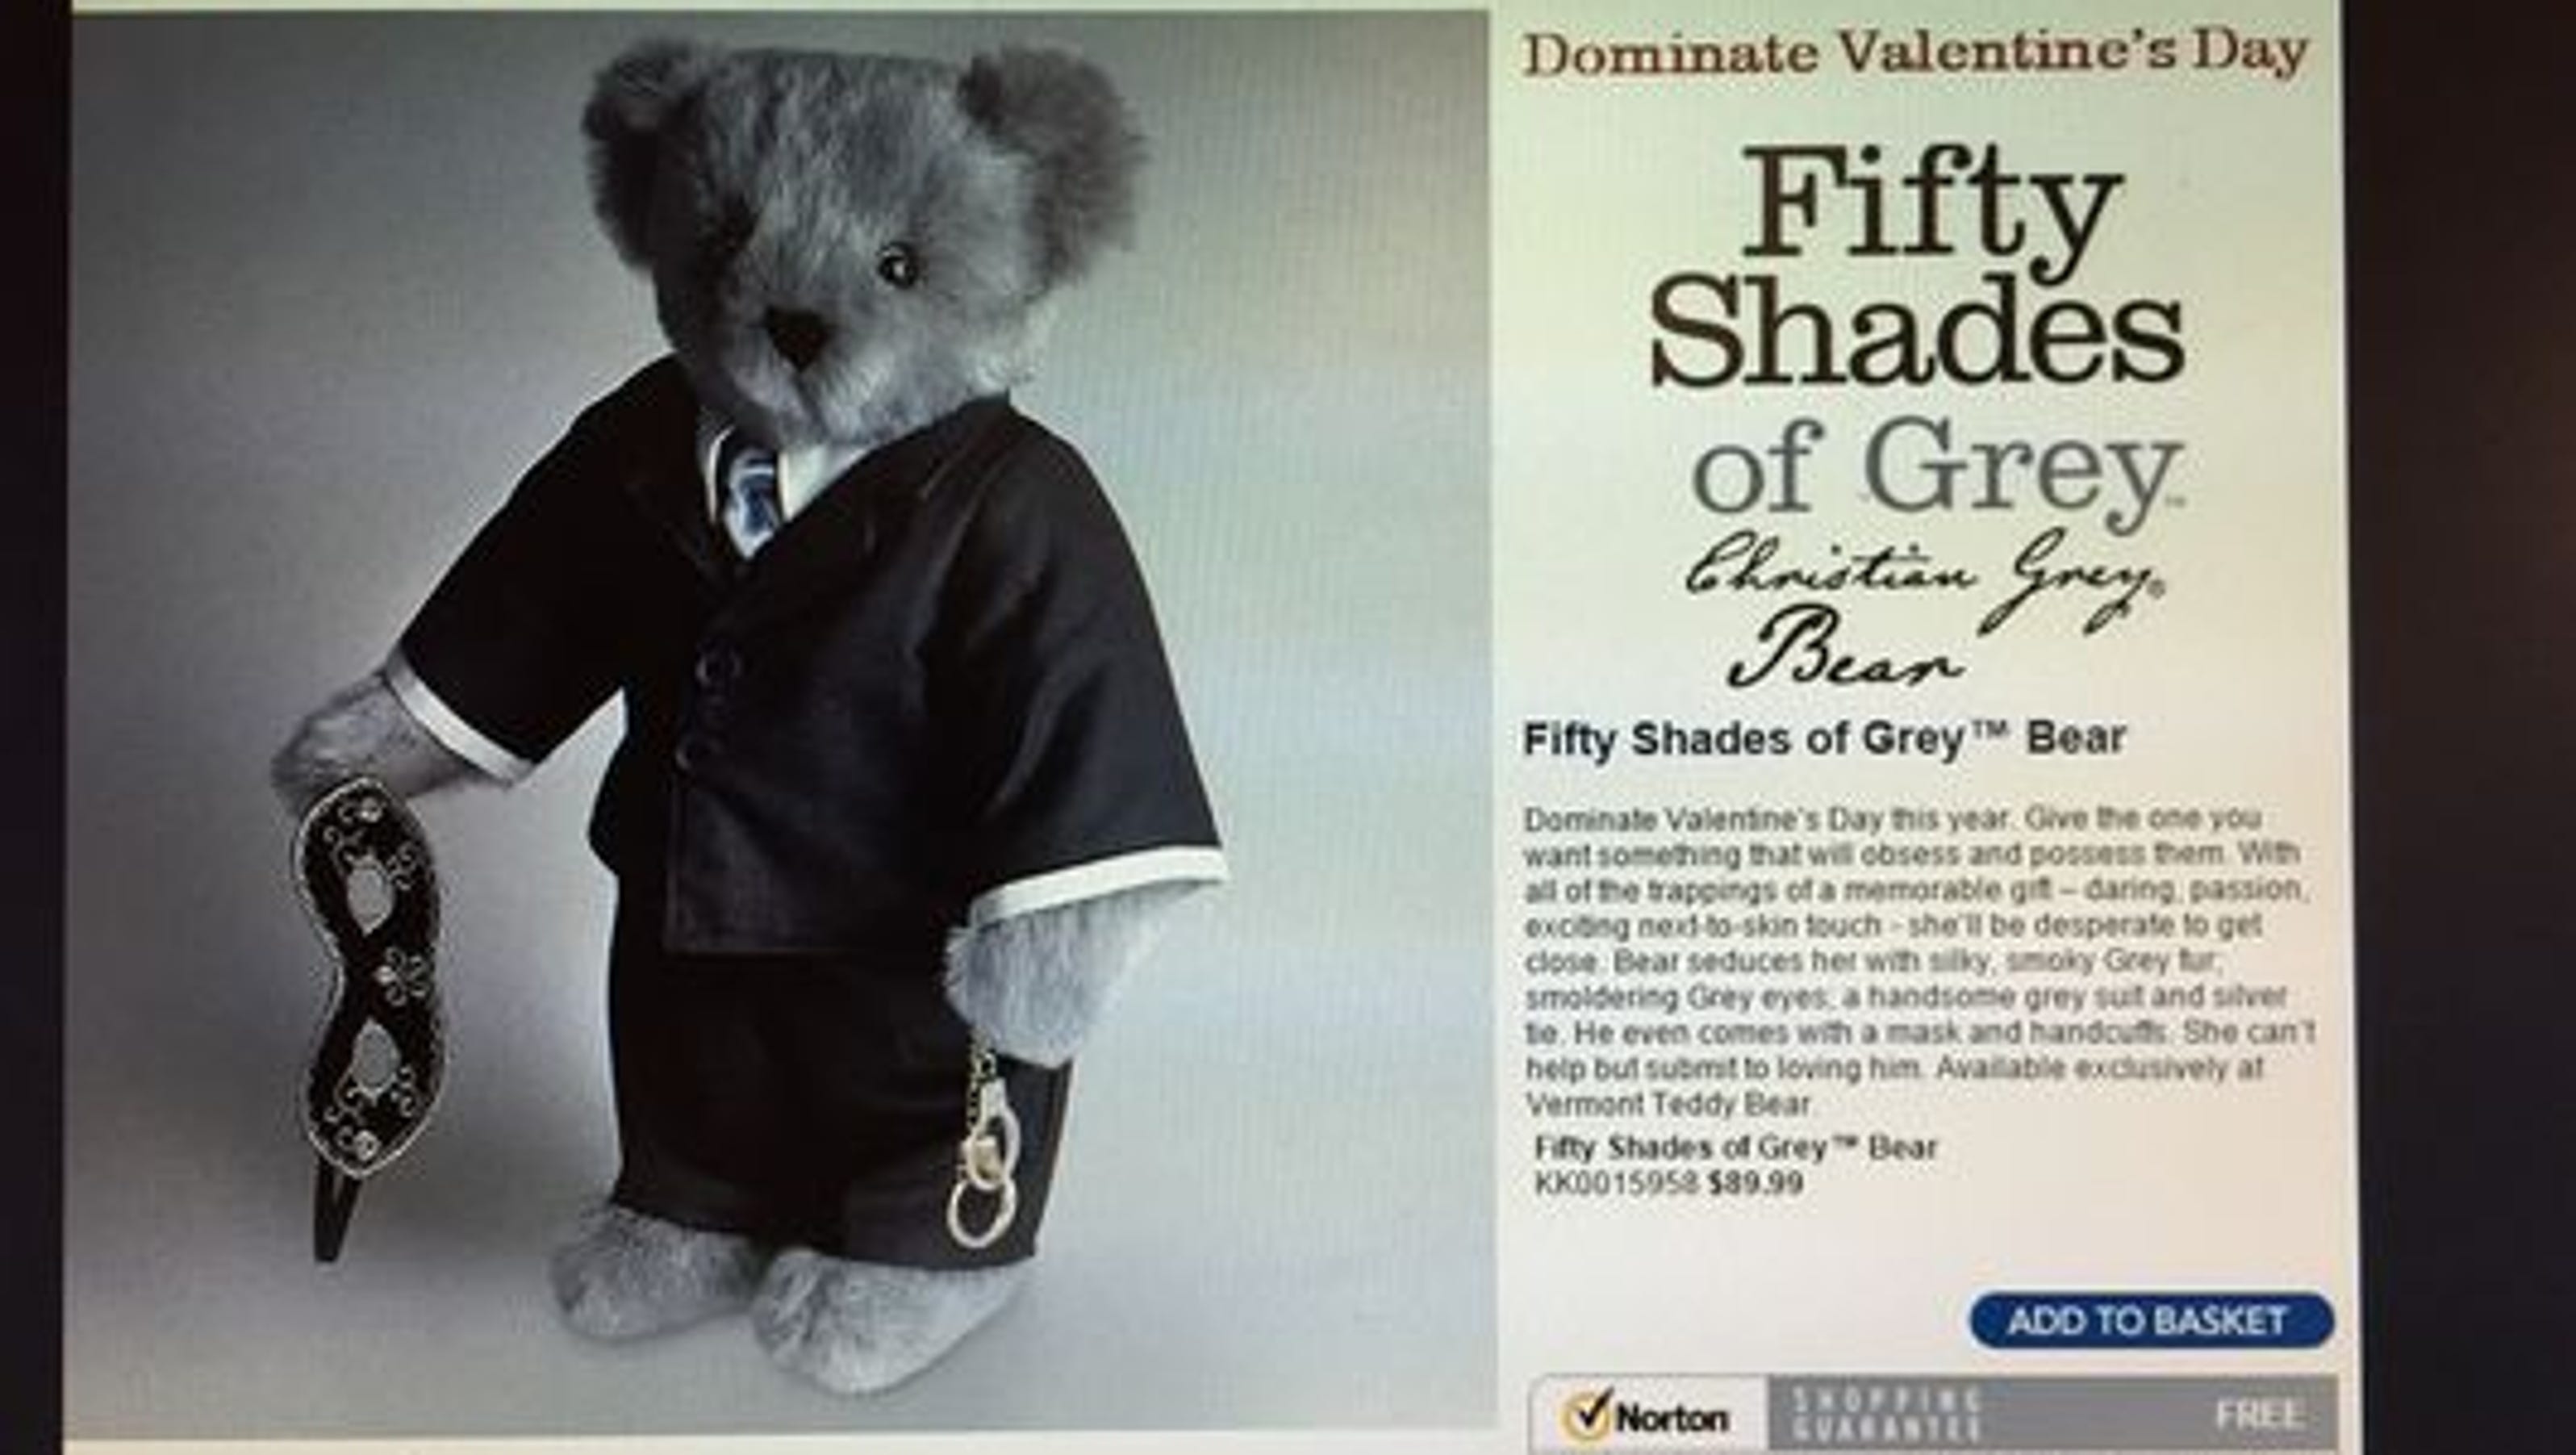 'Fifty Shades of Grey' bear wants to 'dominate' V-Day